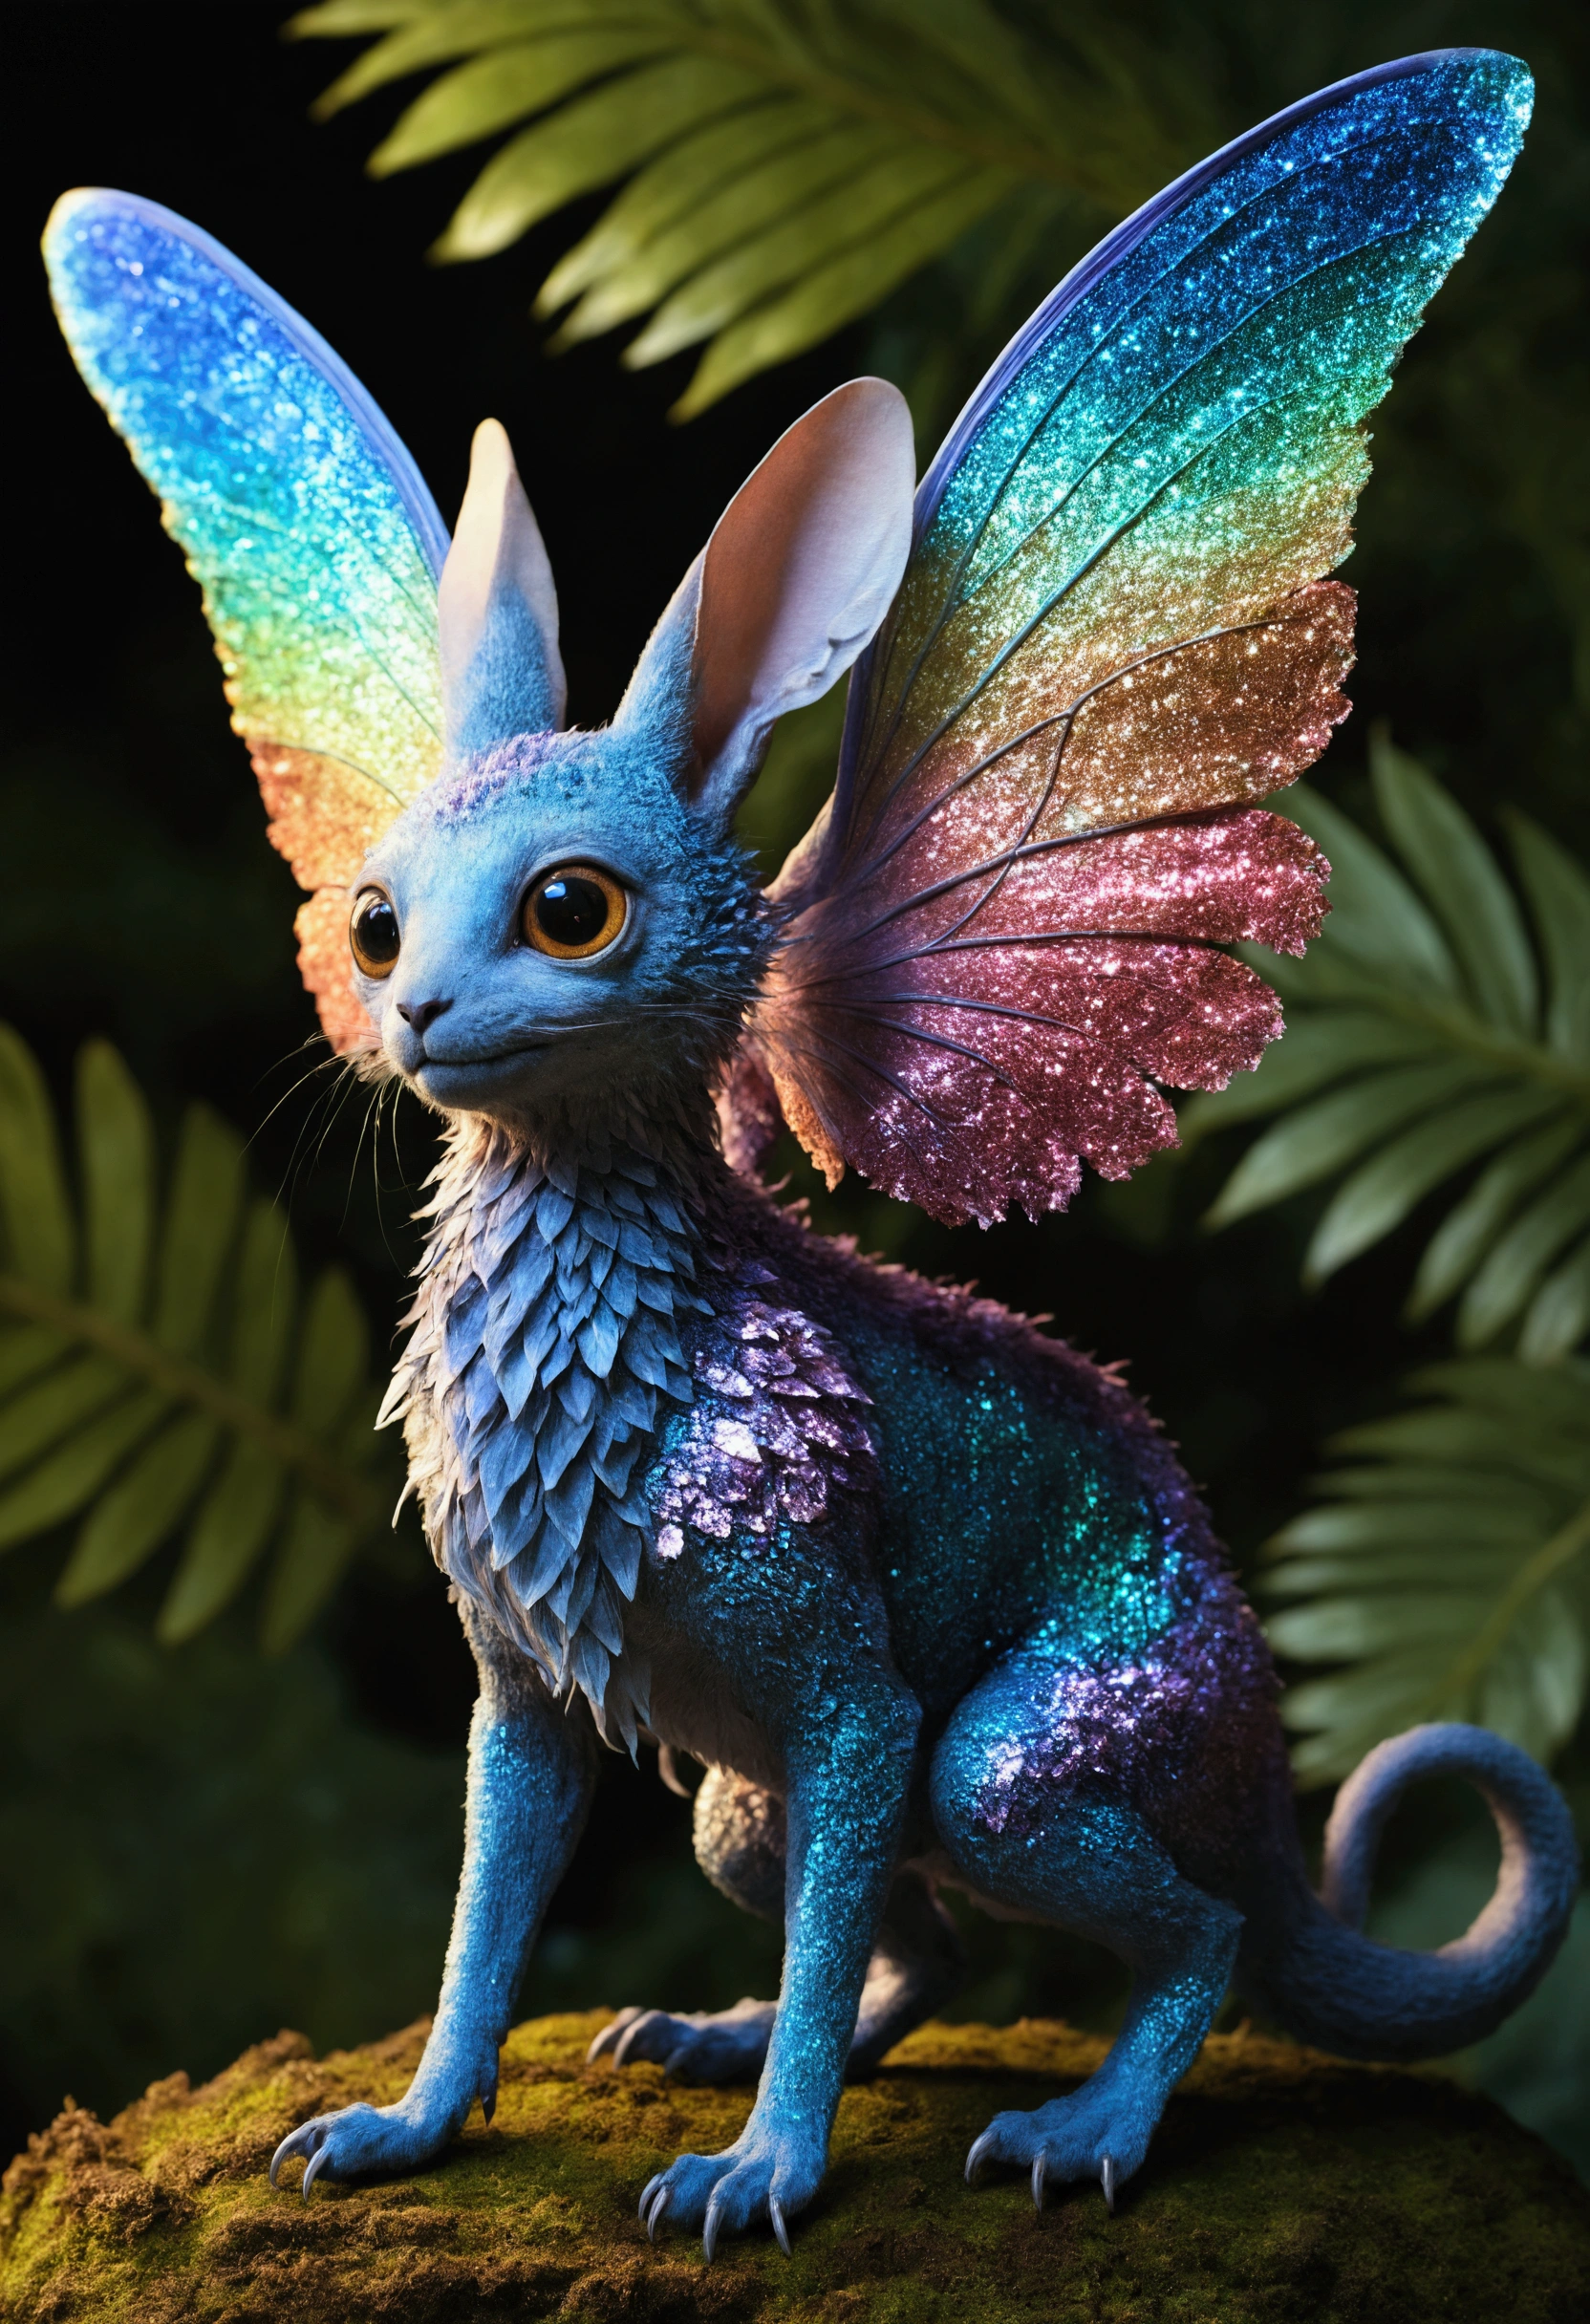 The Zalavira is a medium-sized creature from a fictional planet. It has shimmering, iridescent fur that changes color with its mood. It has large wing-like ears sensitive to subsonic vibrations, making it a natural disaster early warning system. It primarily feeds on exotic plants and fruits, with a fondness for nectar from unique blossoms on its planet. It's a unique and treasured member of the planet's ecosystem